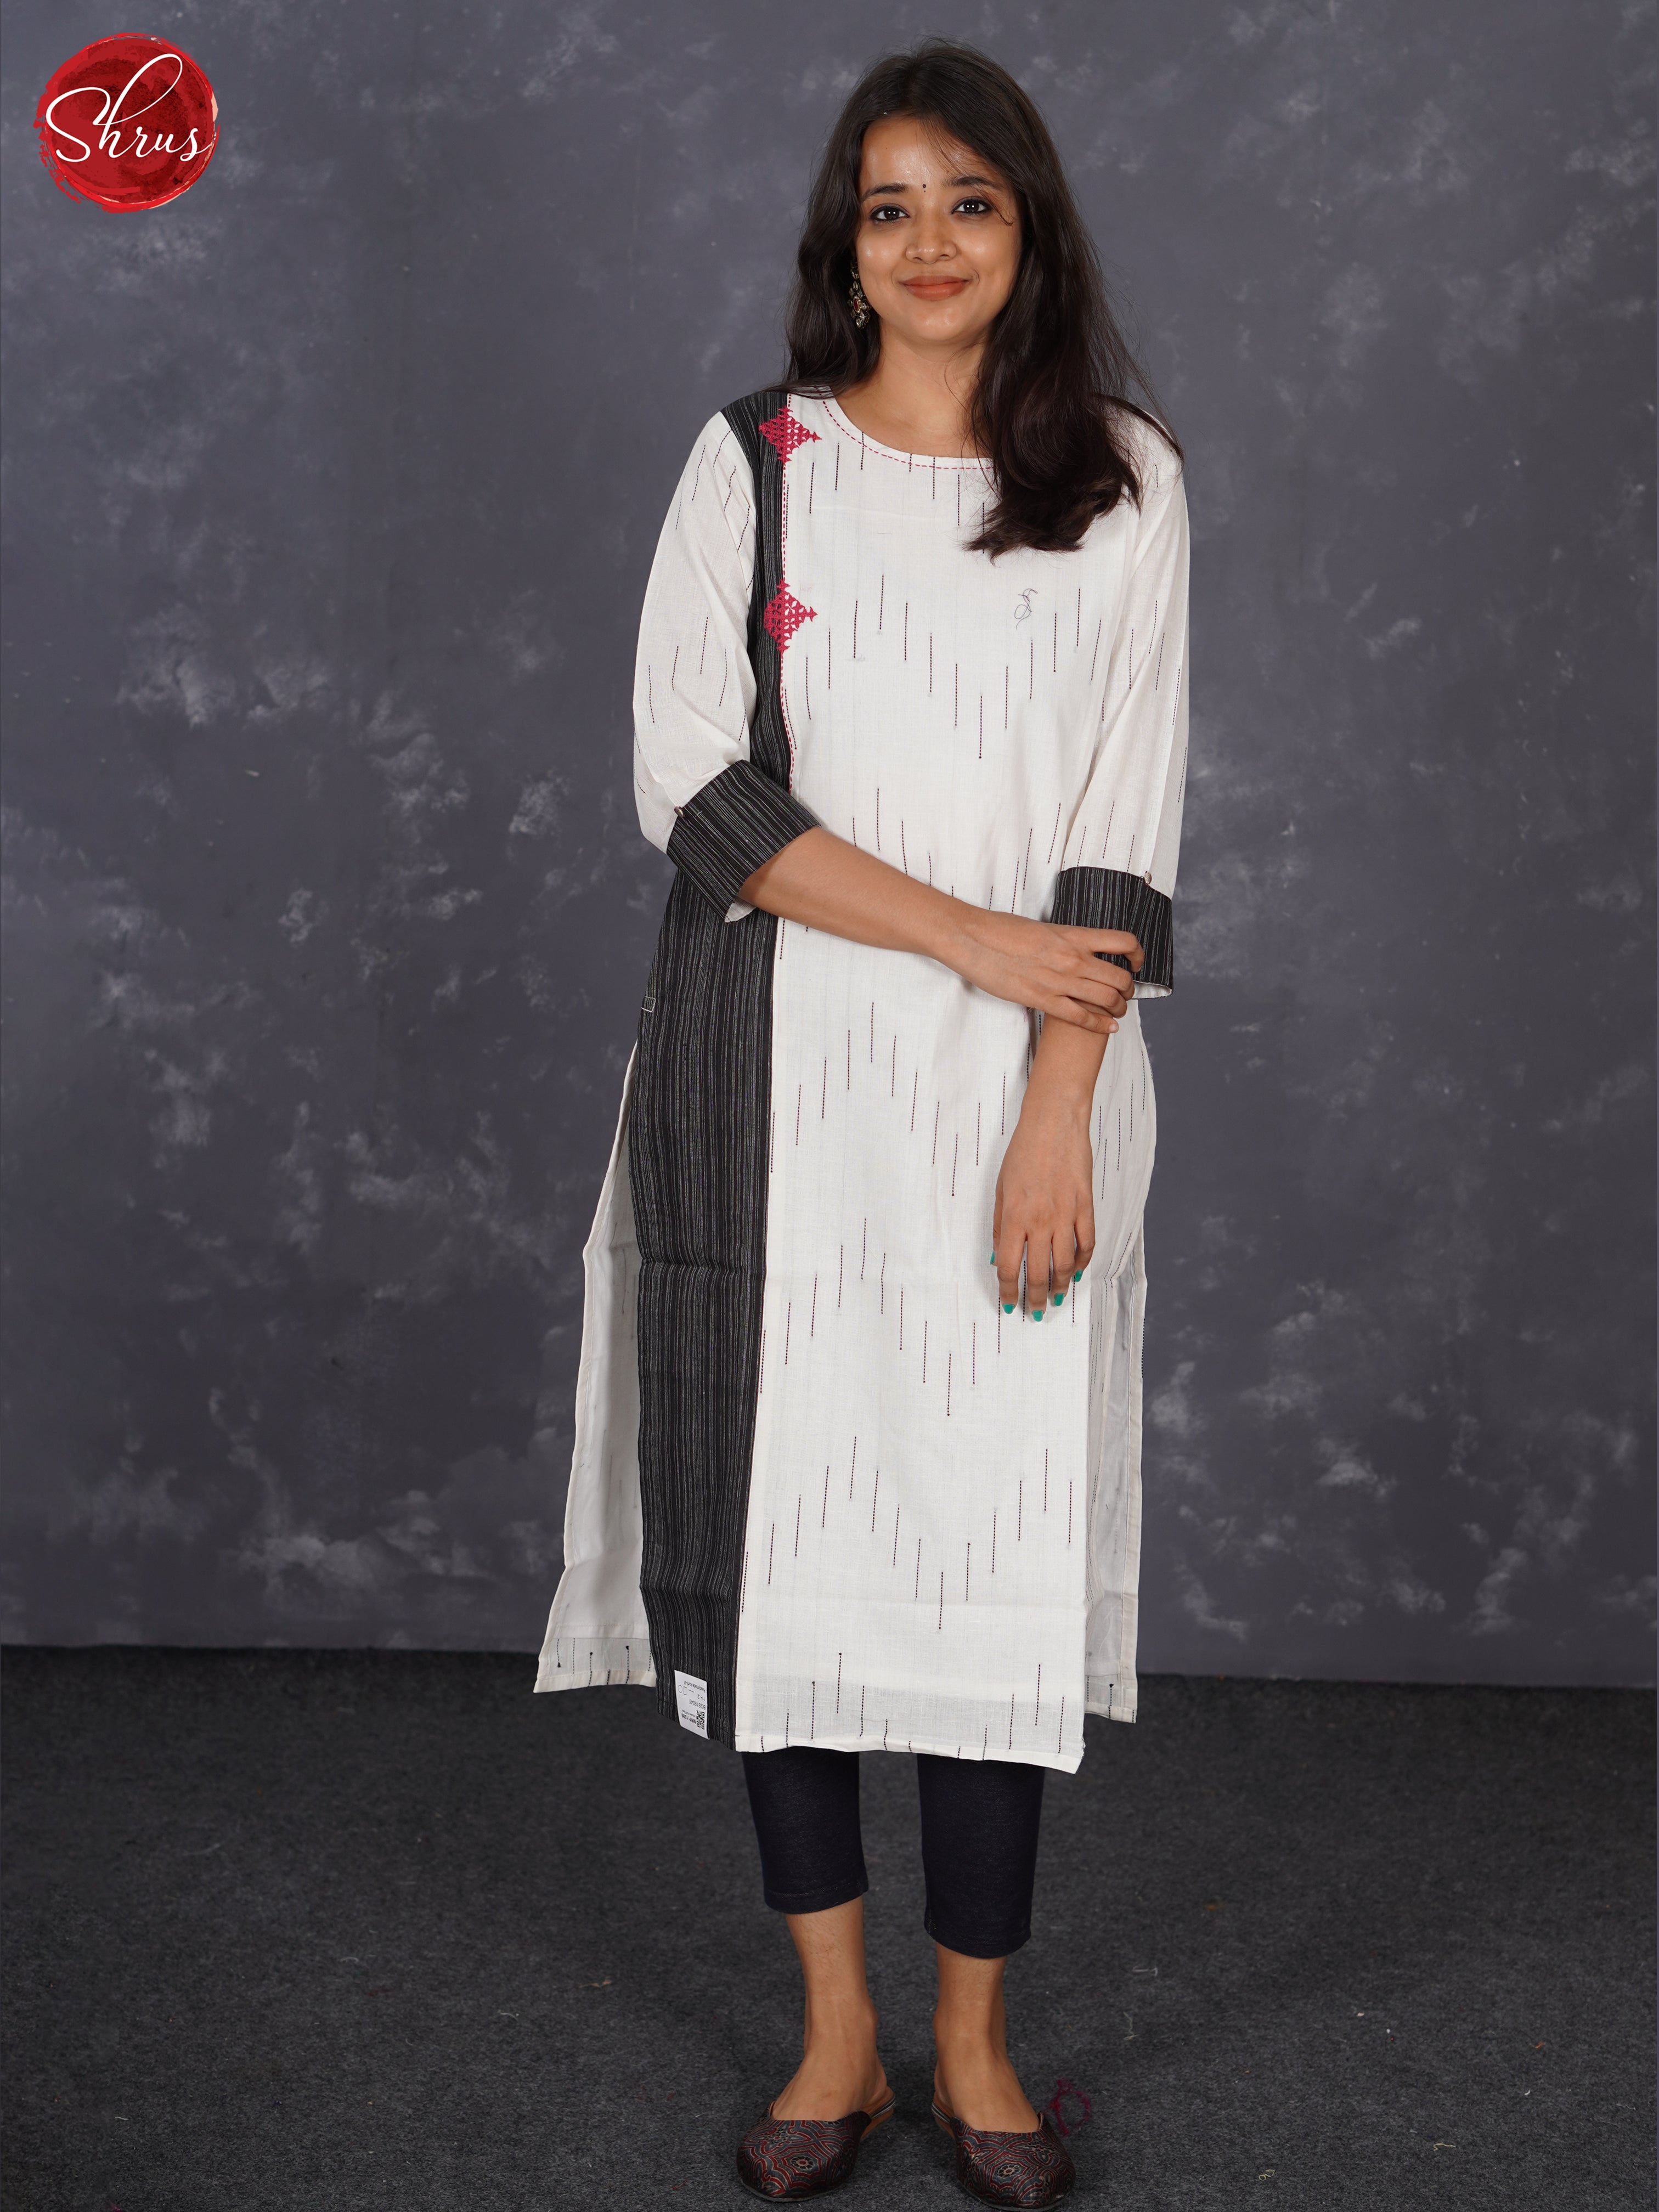 White & Black - Readymade kurti top with ikkat patch work - Shop on ShrusEternity.com